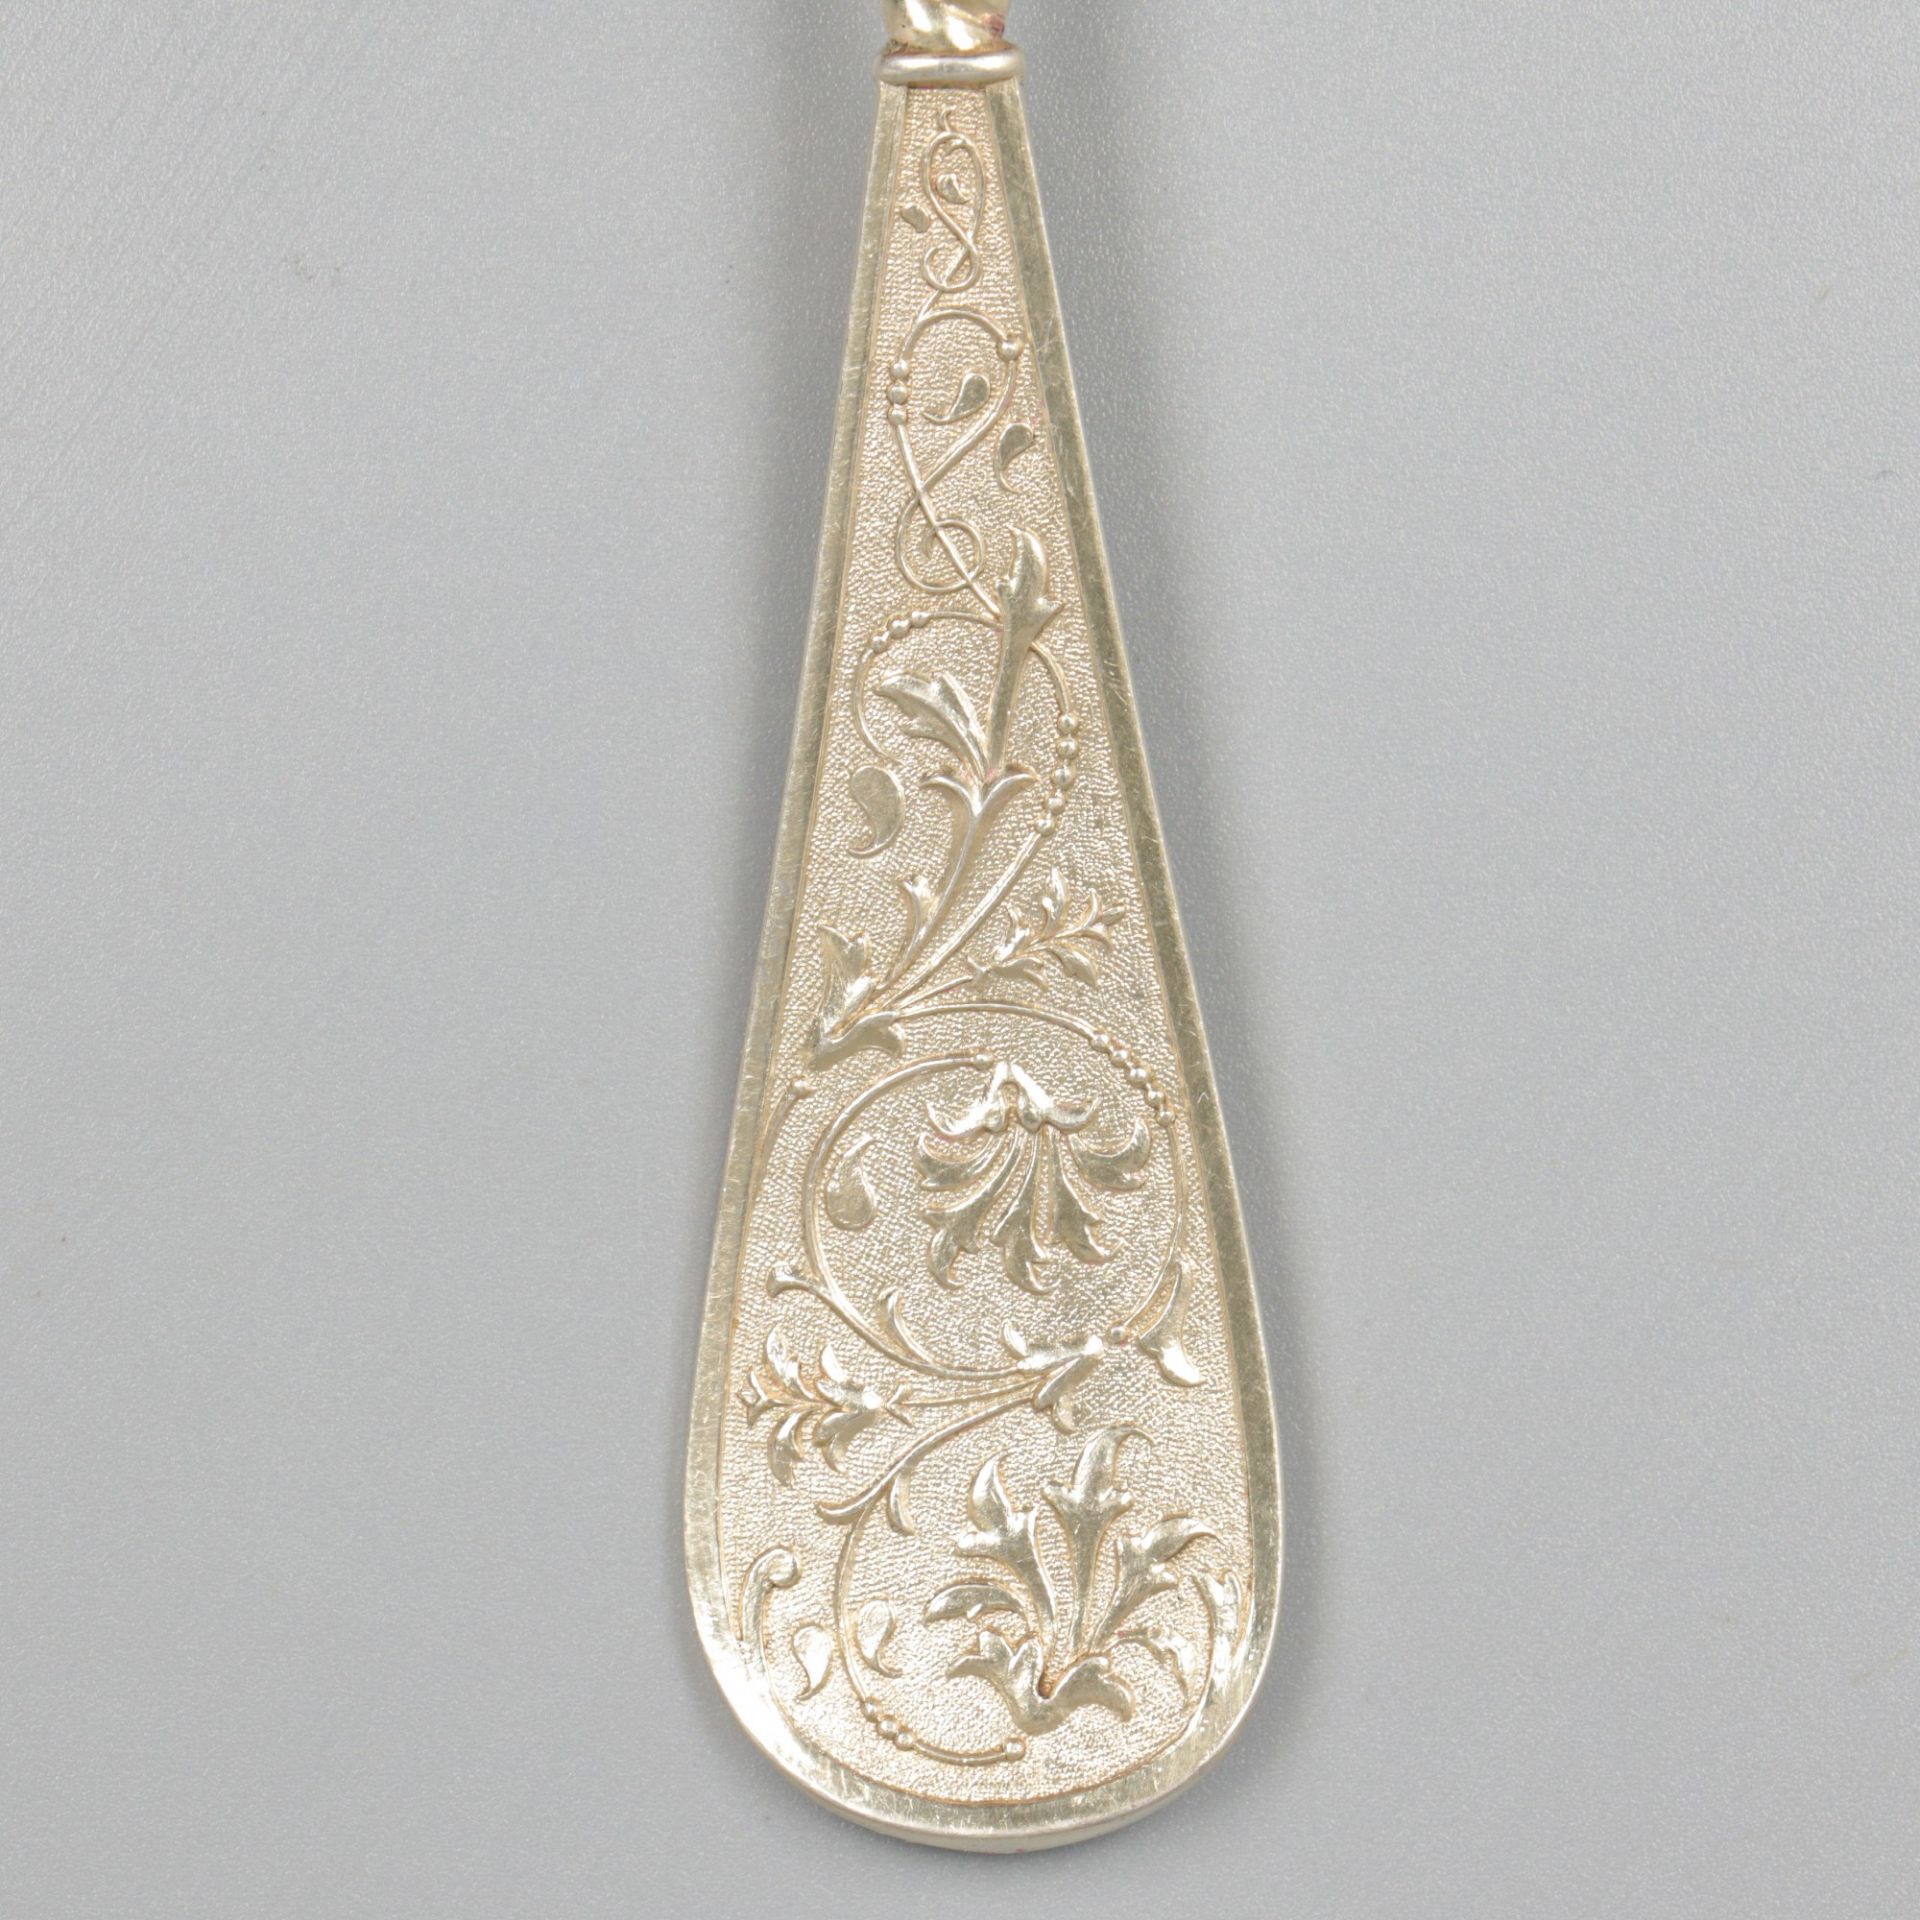 Pastry scoop / server silver. - Image 5 of 6